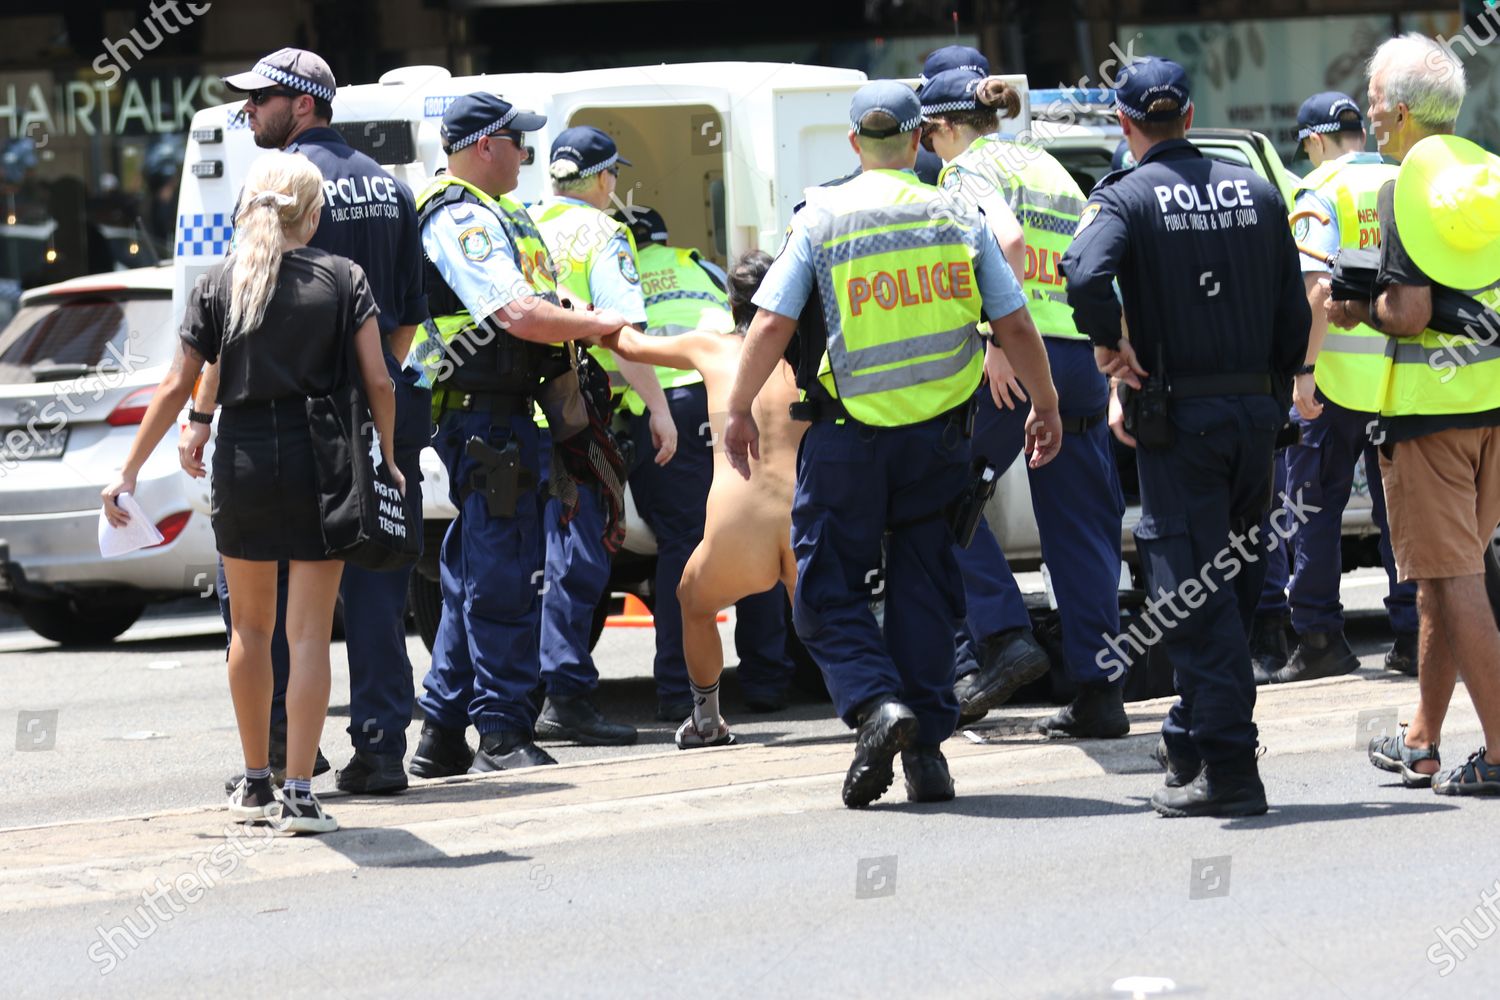 Naked woman arrested at the Invasion Day march protesting 